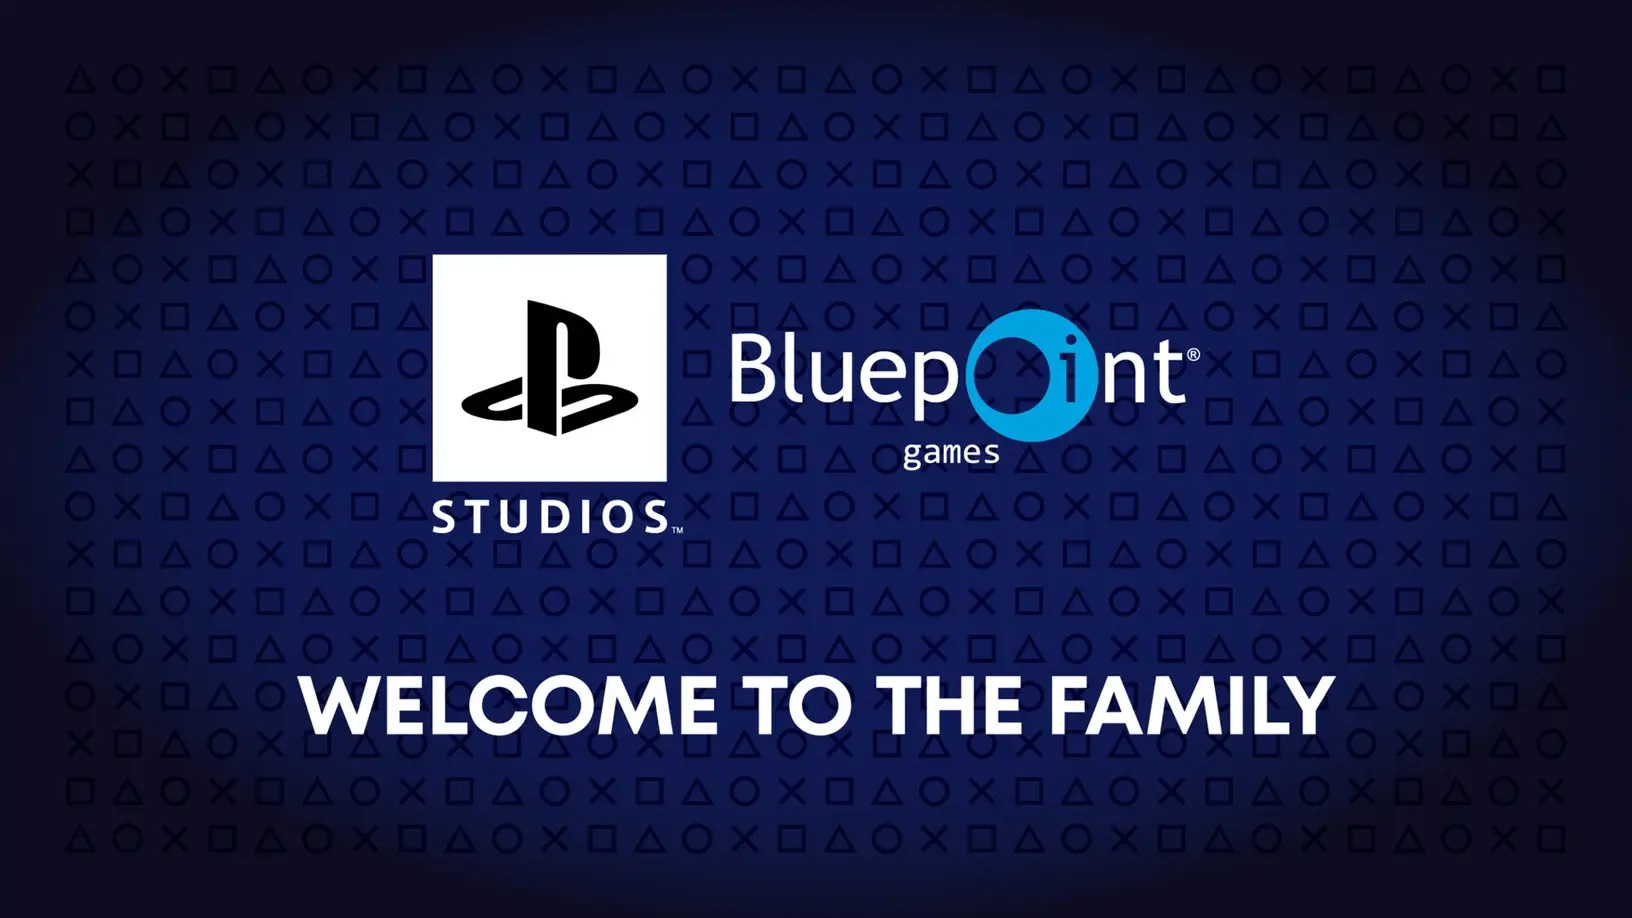 Sony has Acquired Bluepoint Games